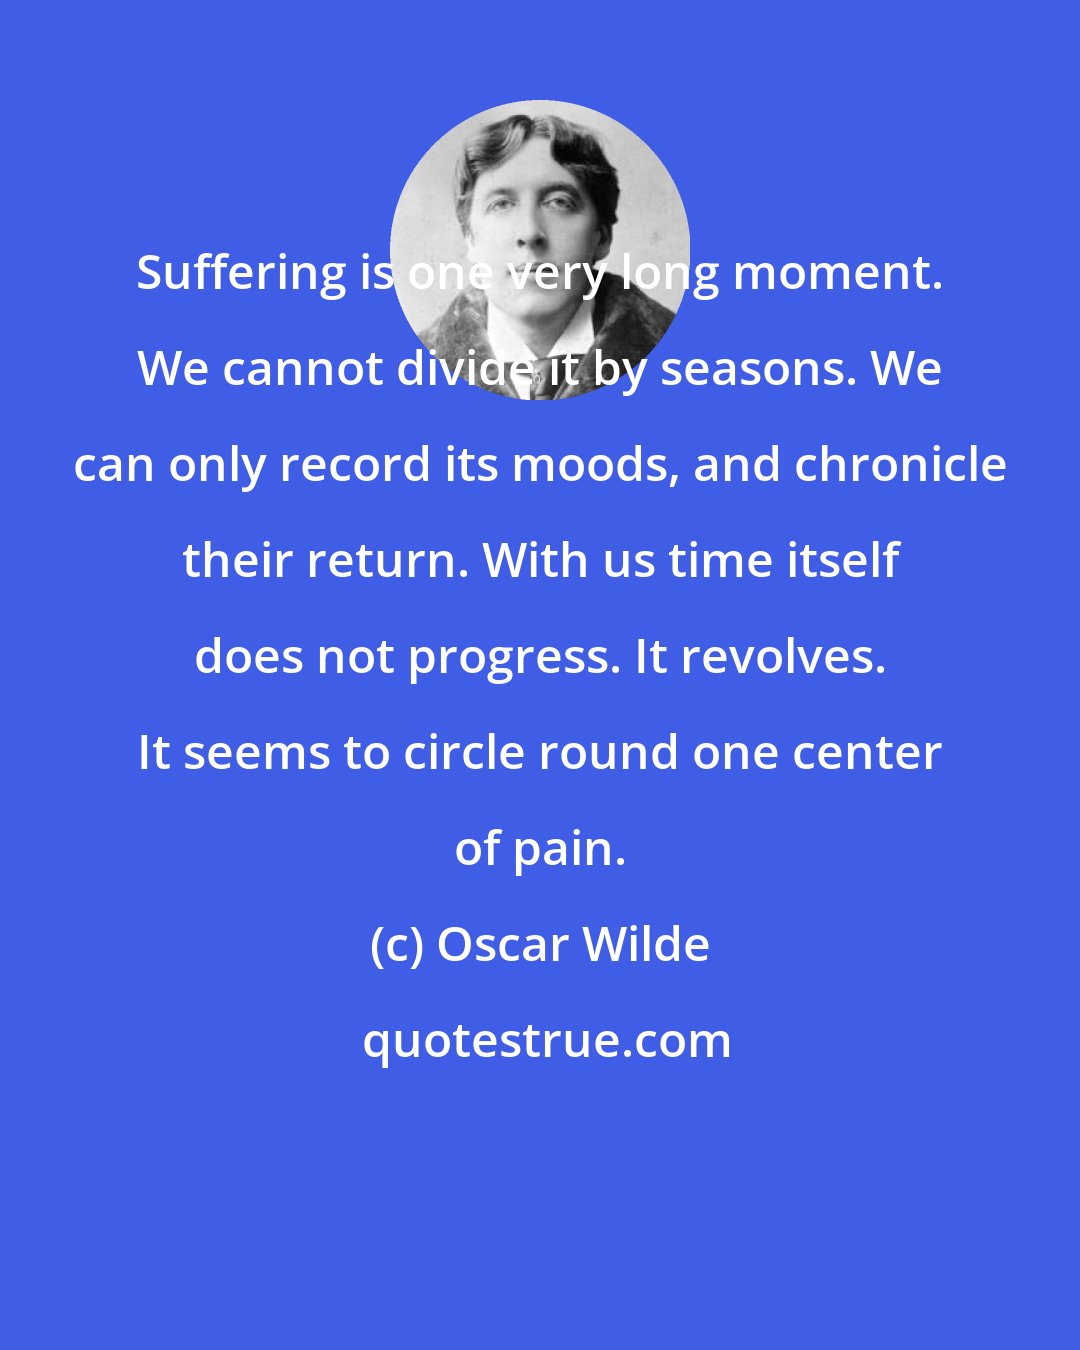 Oscar Wilde: Suffering is one very long moment. We cannot divide it by seasons. We can only record its moods, and chronicle their return. With us time itself does not progress. It revolves. It seems to circle round one center of pain.